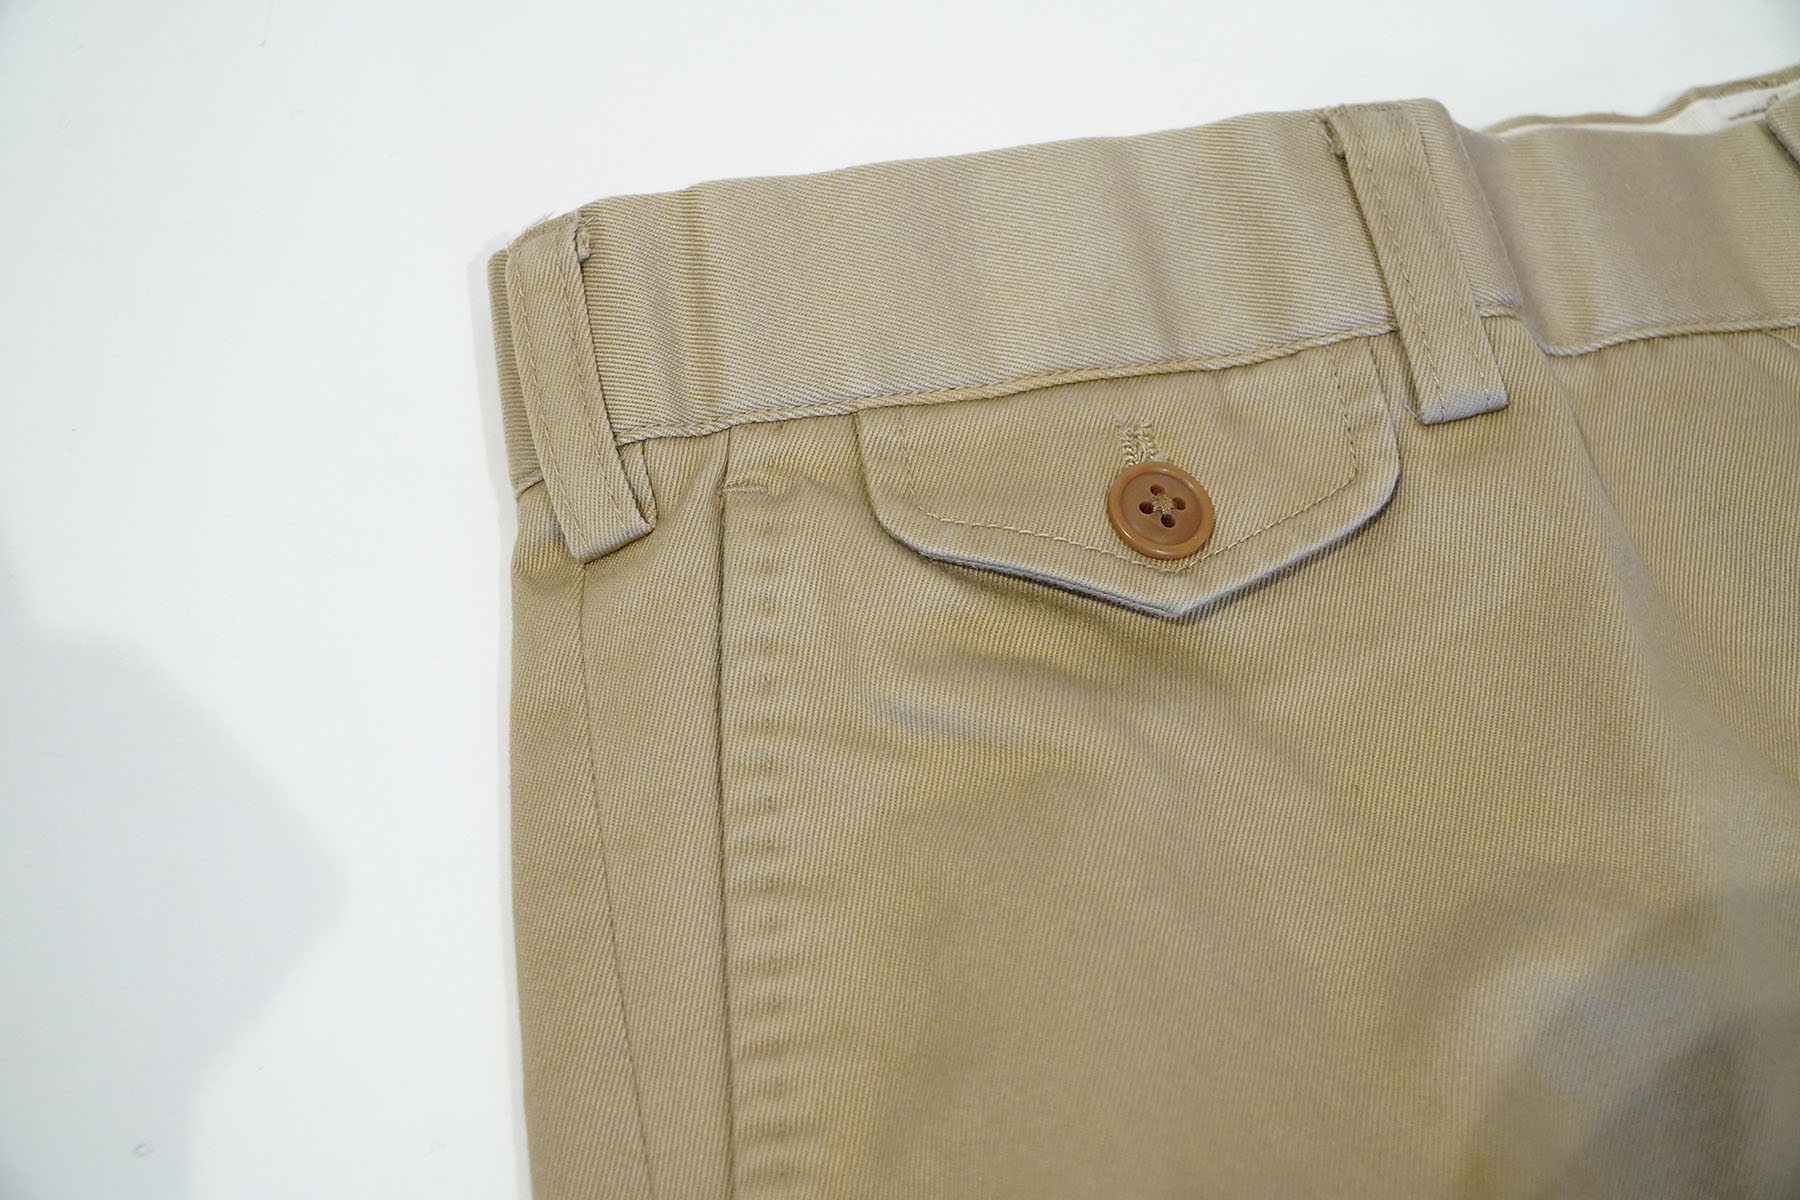 DCWHITE "WEST POINT OFFICER PANT" coin pocket